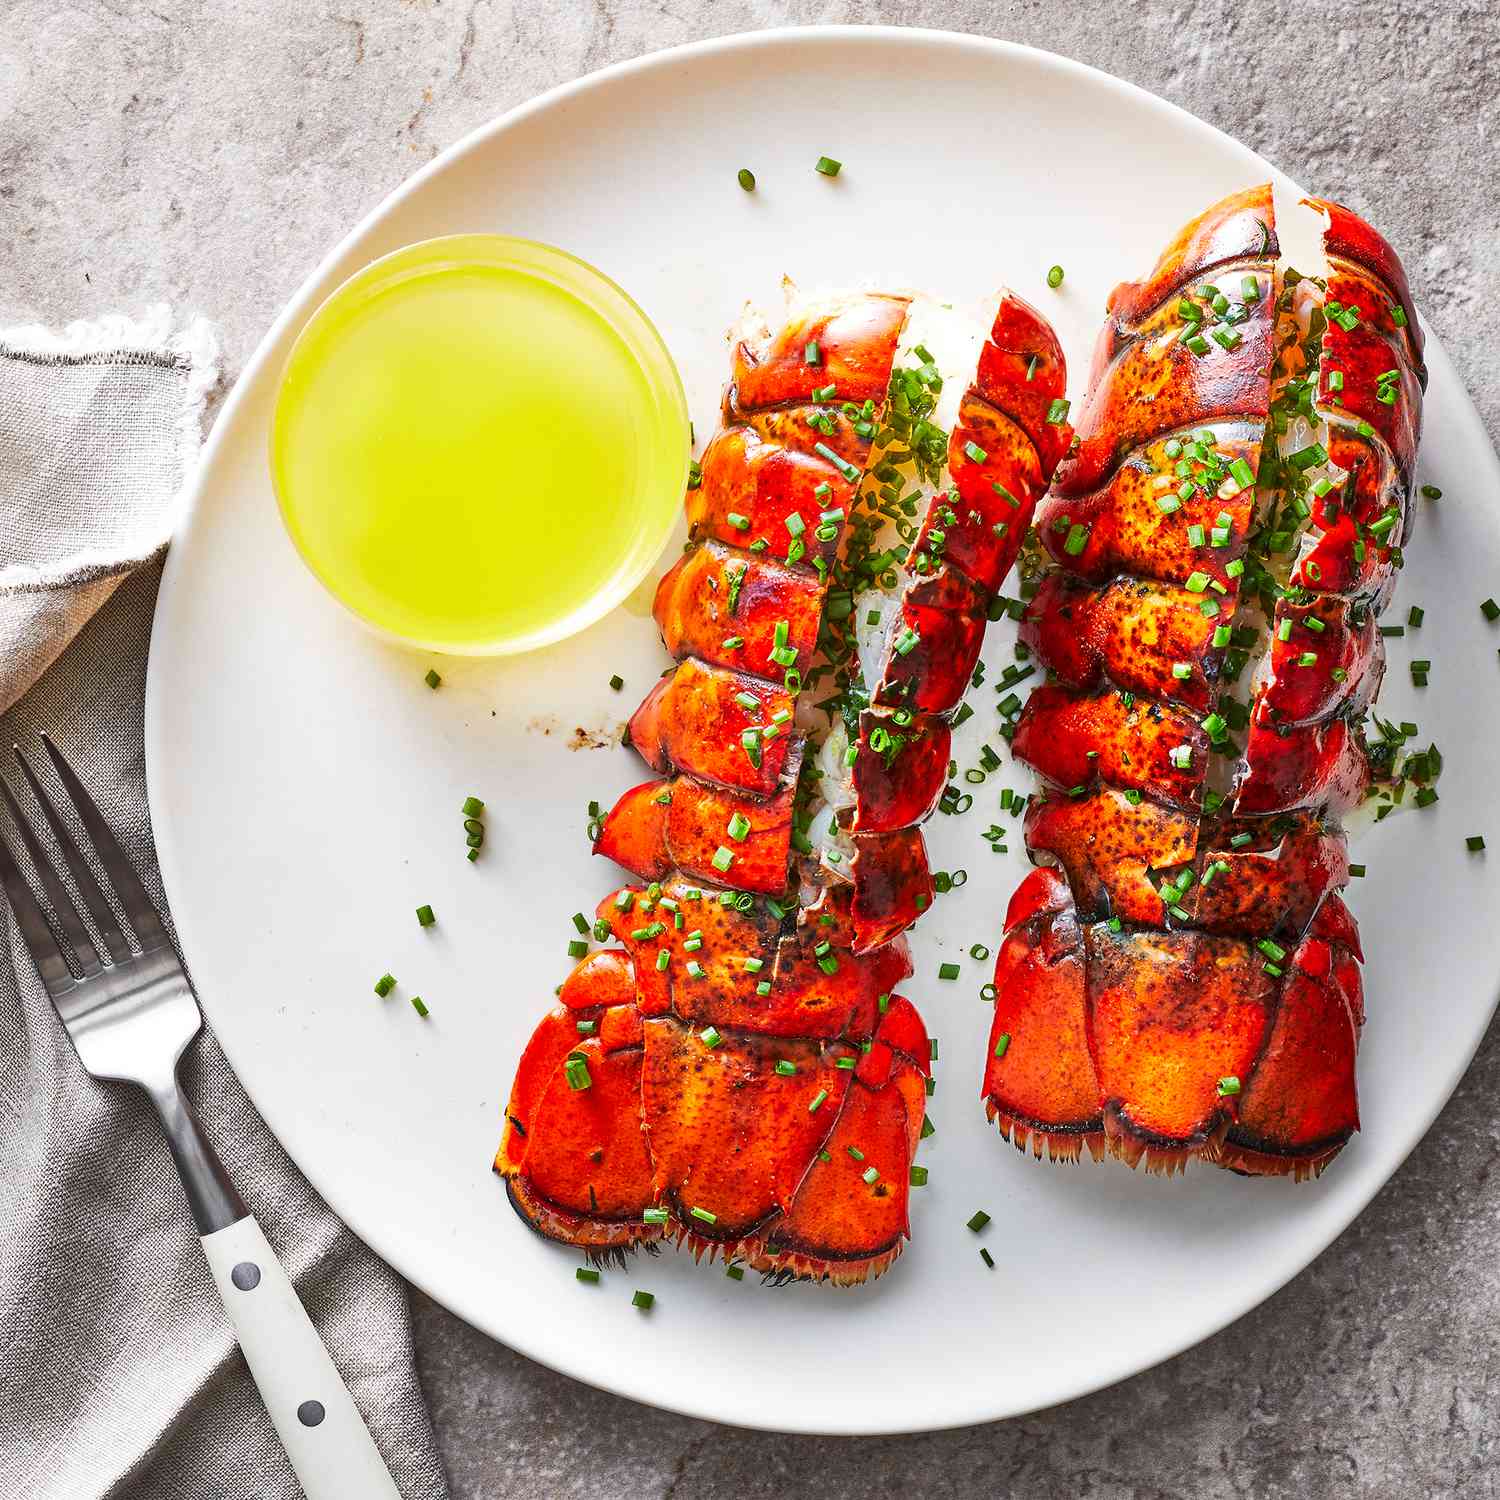 Grilled Lobster Tails with Drawn Butter